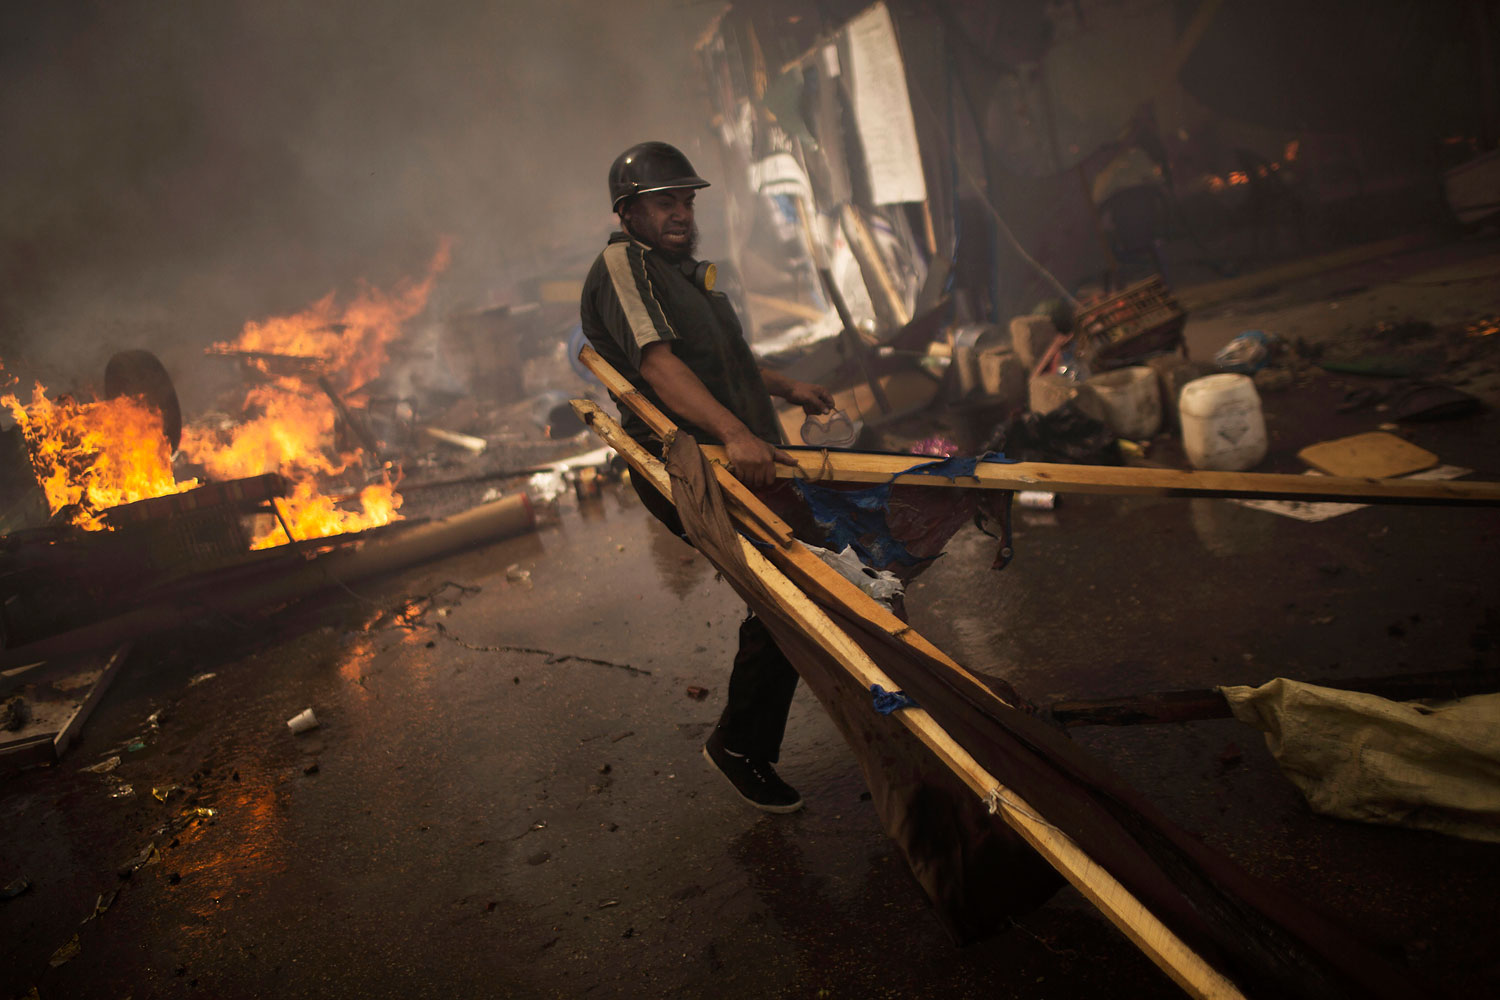 A supporter of ousted Islamist President Mohammed Morsi carries woods to burn in a fire barricade at the sit-in at Rabaa Al-Adawiya square in Cairo's Nasr City district, Aug. 14, 2013.